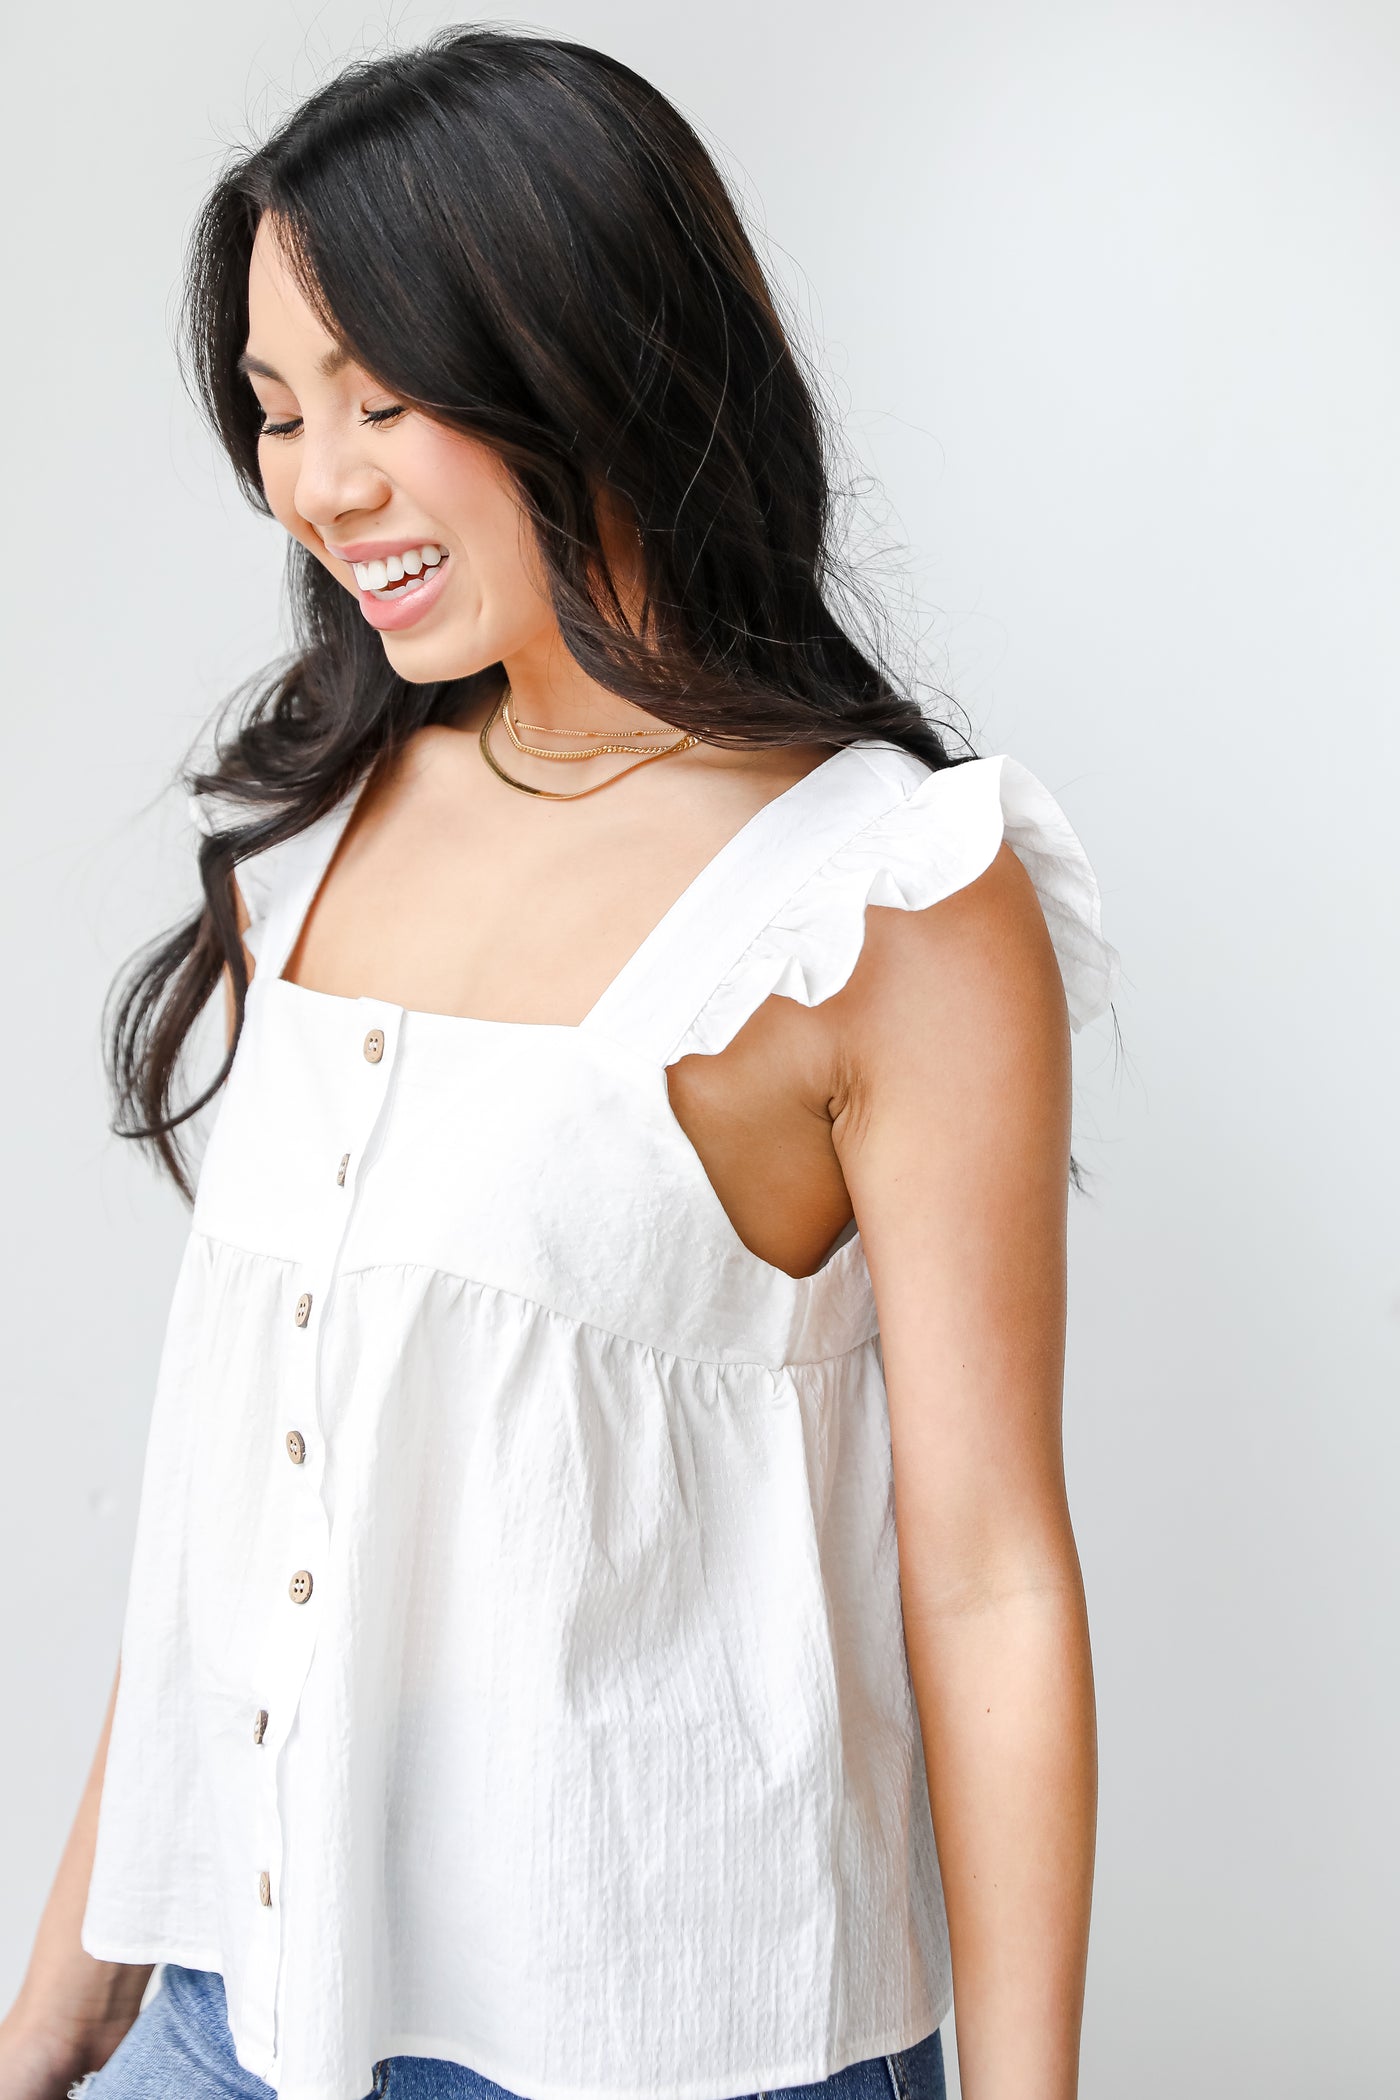 Babydoll Tank in white side view